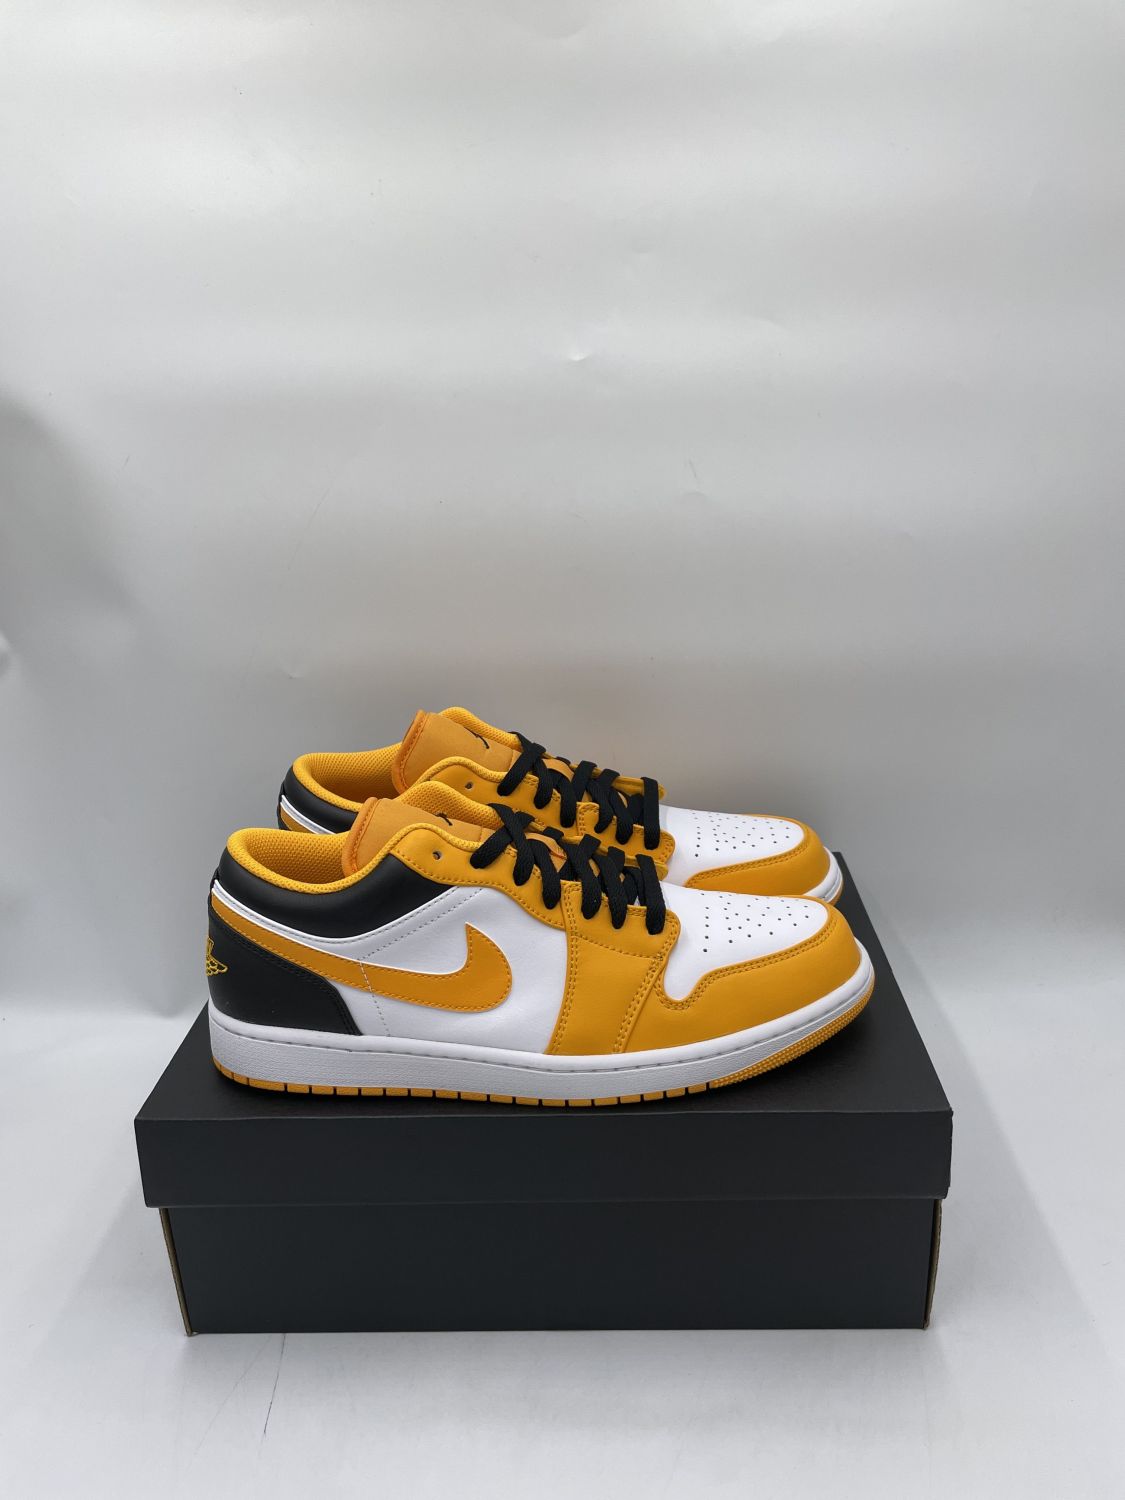 GmarShops Marketplace  Where To Buy The The Air Jordan 1 Low Taxi